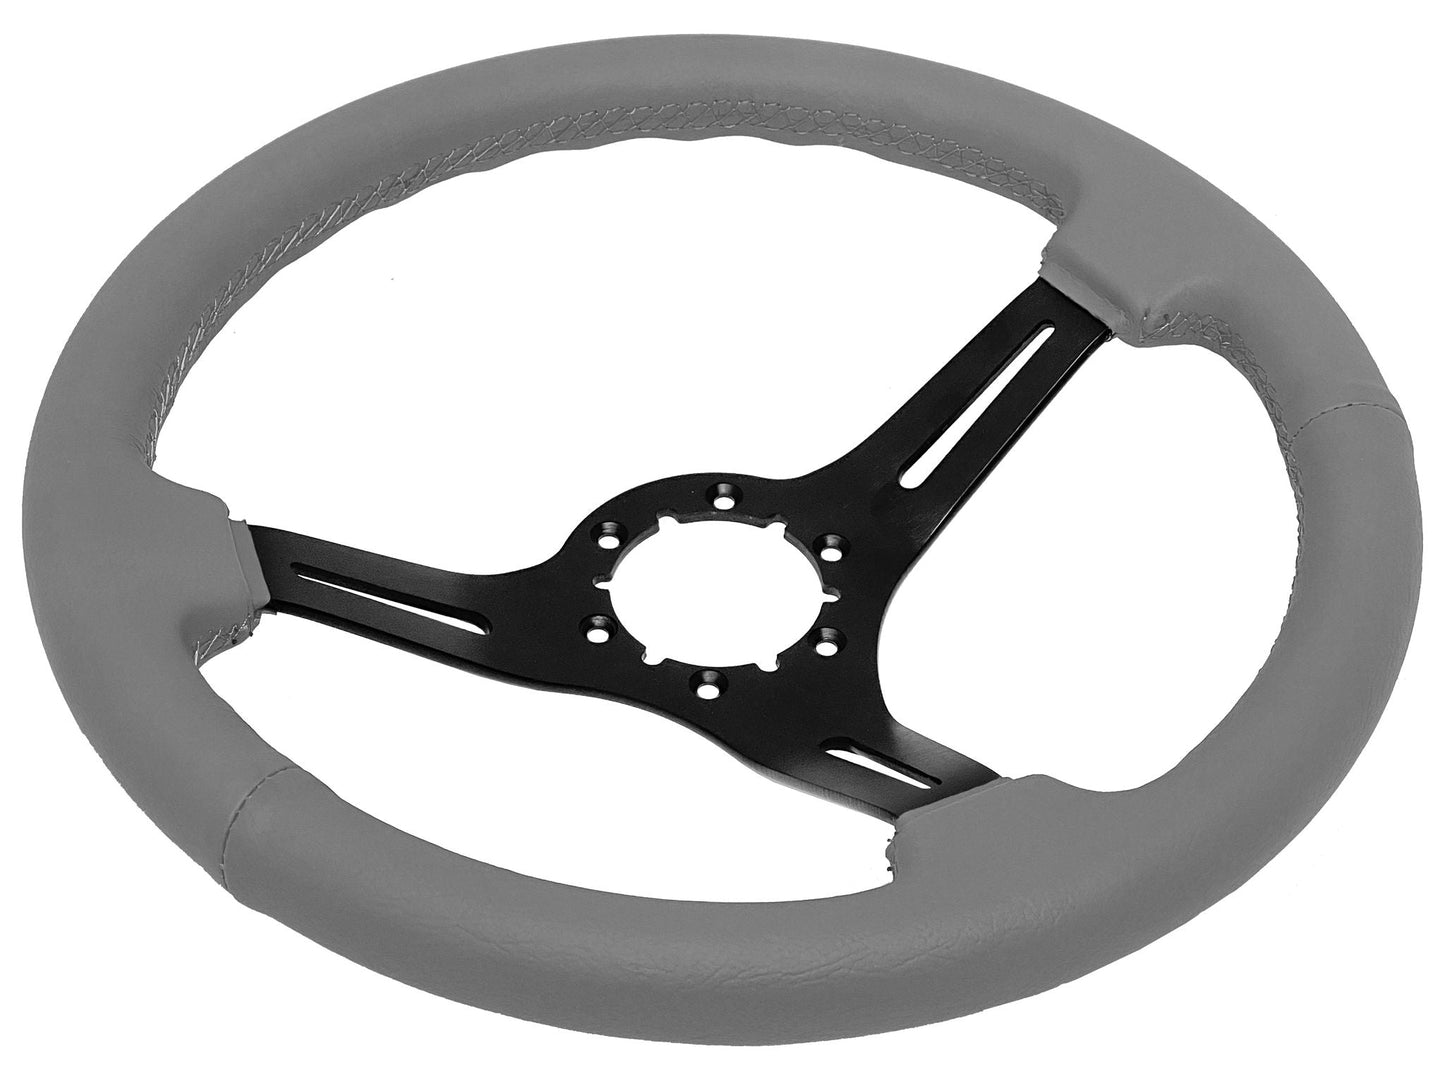 1979-82 Ford Mustang Steering Wheel Kit | Grey Leather | ST3060GRY